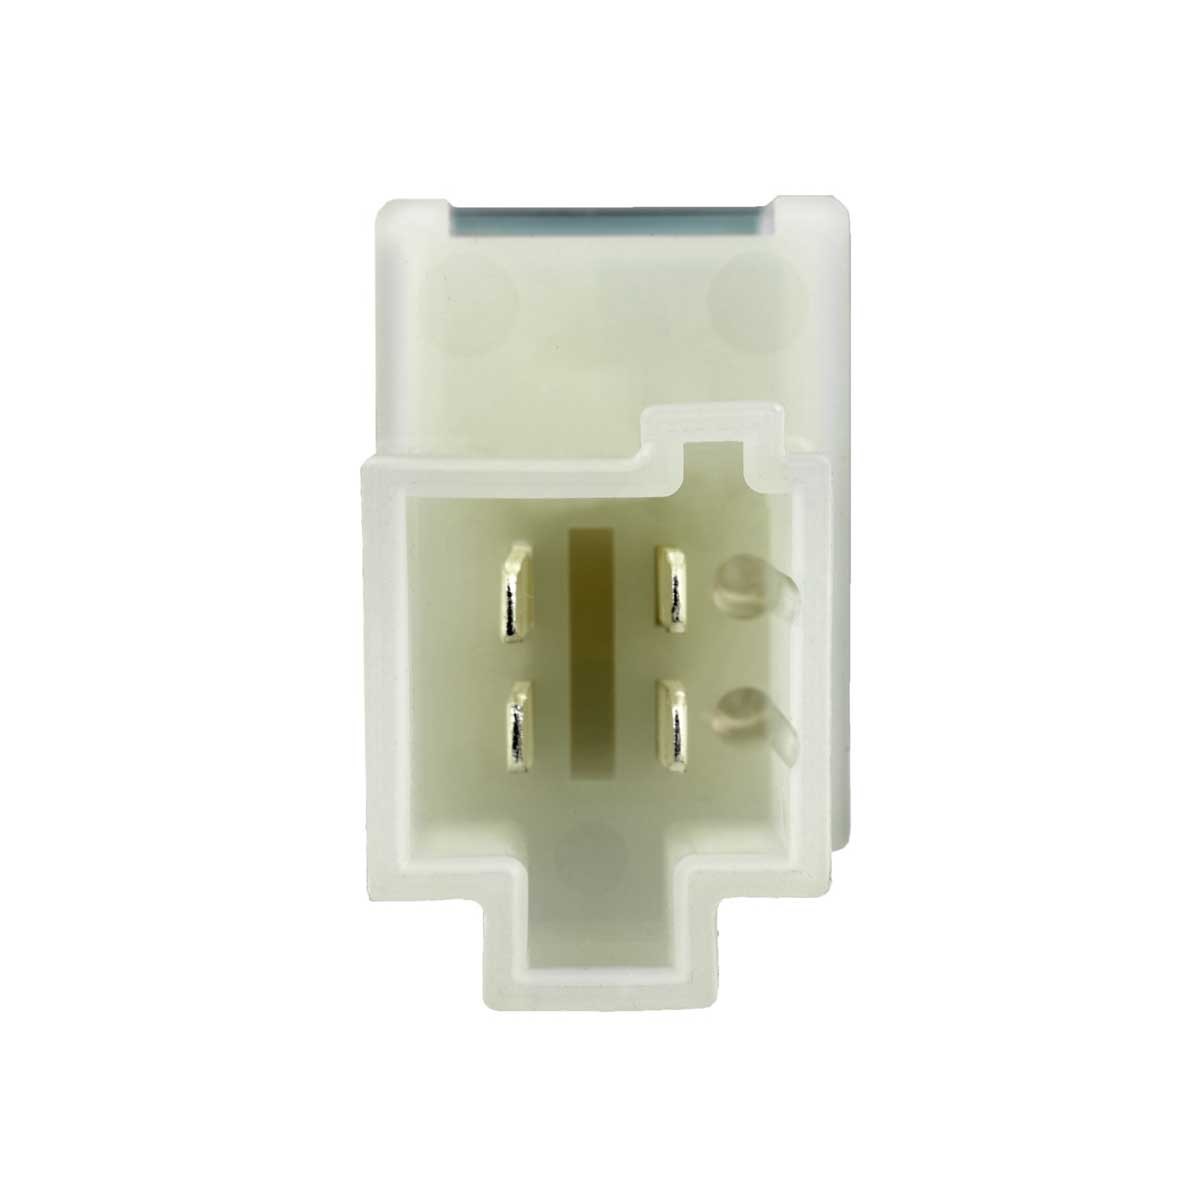 MEYLE Brake stop light switch 014 890 0009 suitable for MERCEDES-BENZ C-Class, VIANO, VITO